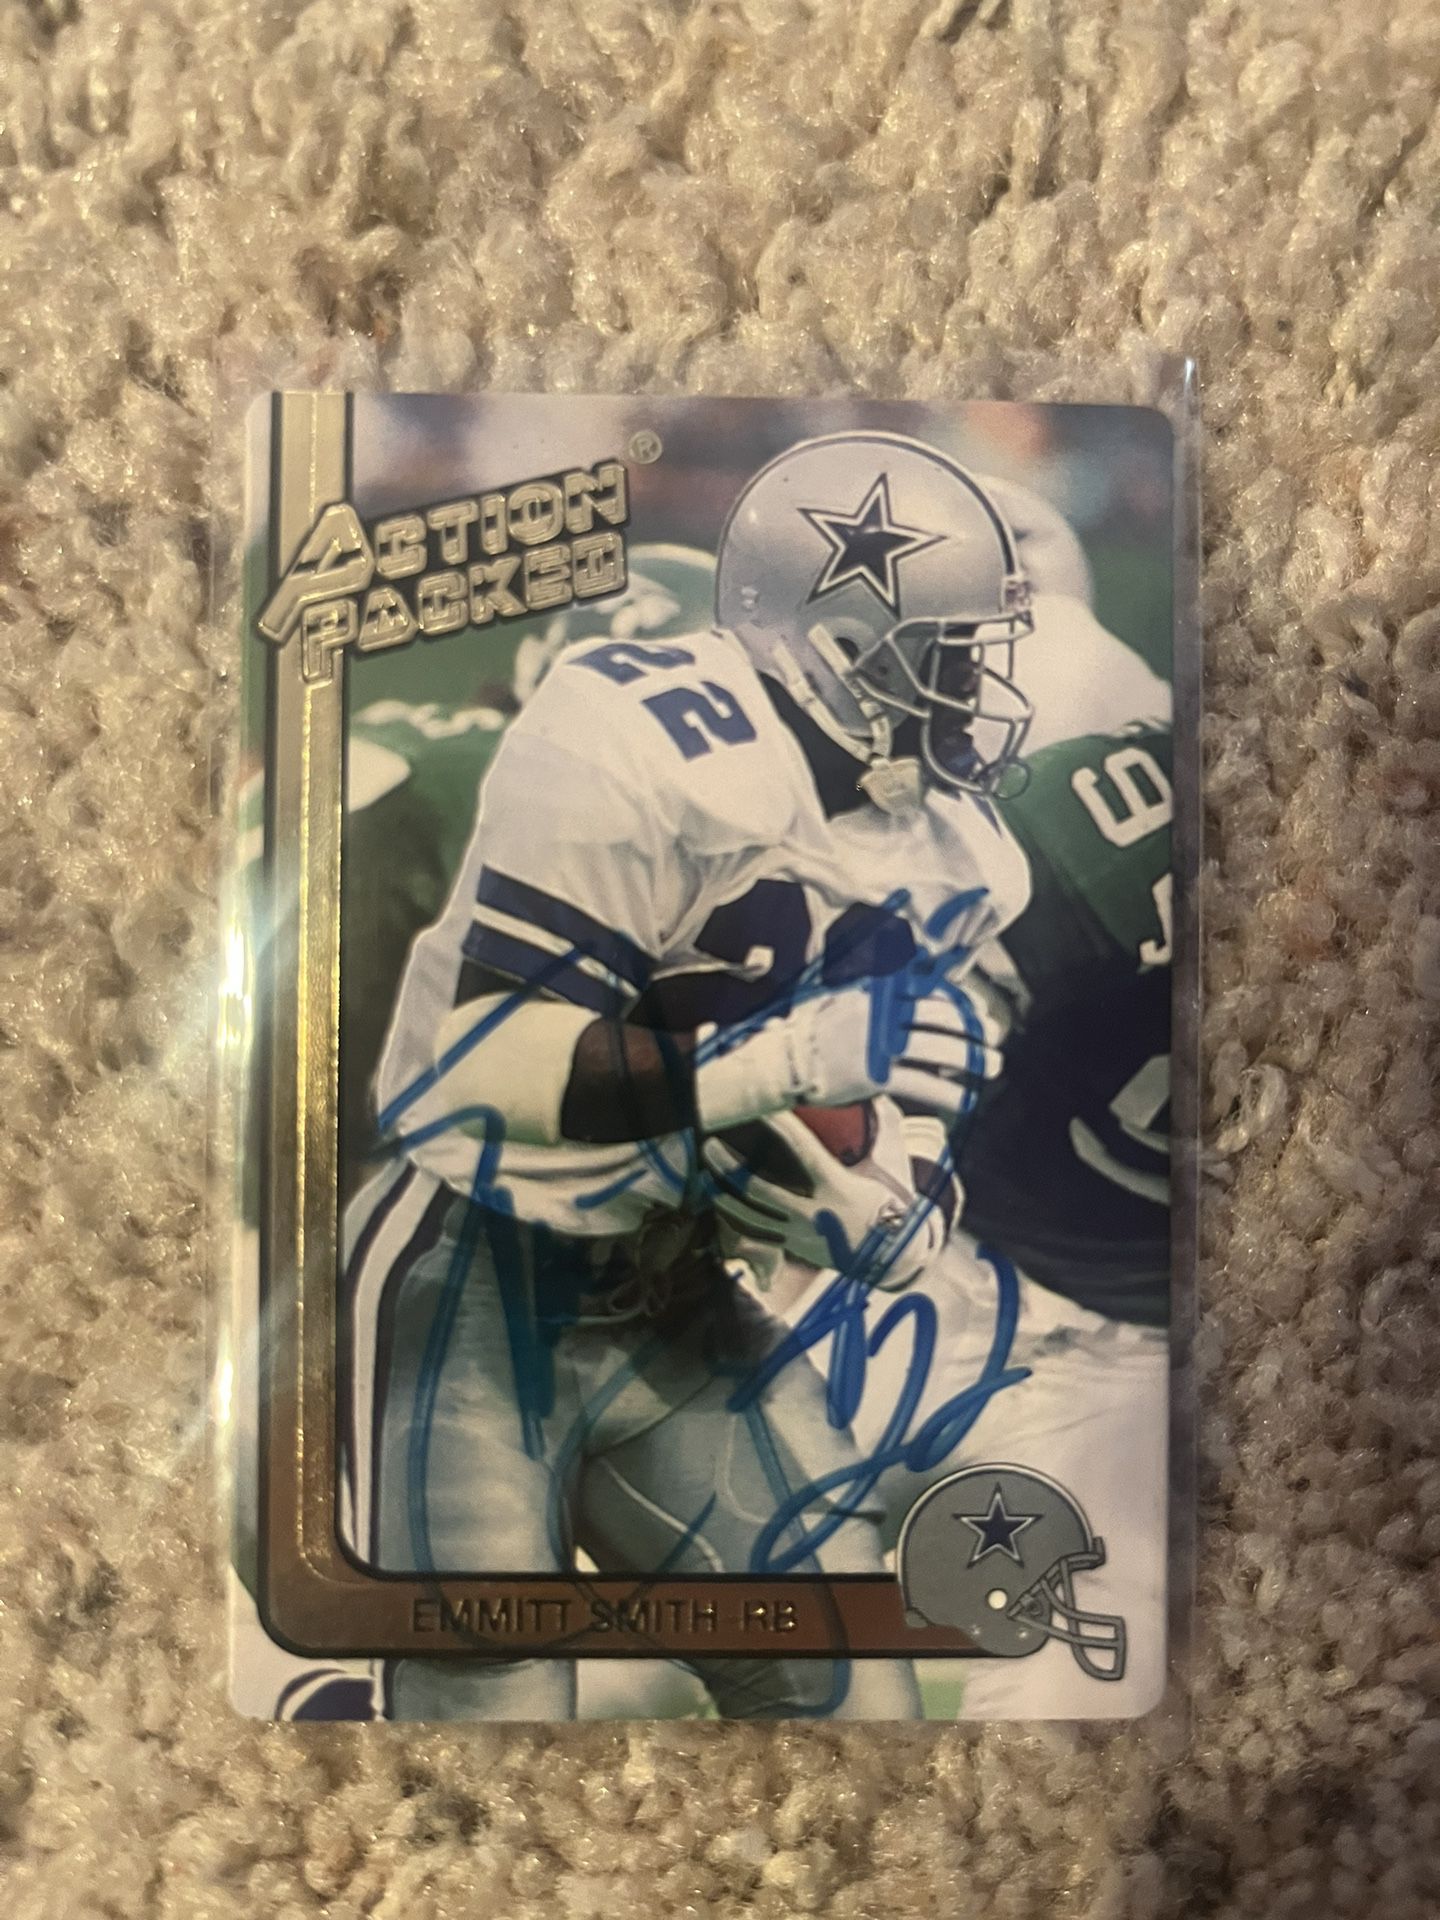 EMMITT SMITH Signed Autographed 1991 ACTION PACKED Card